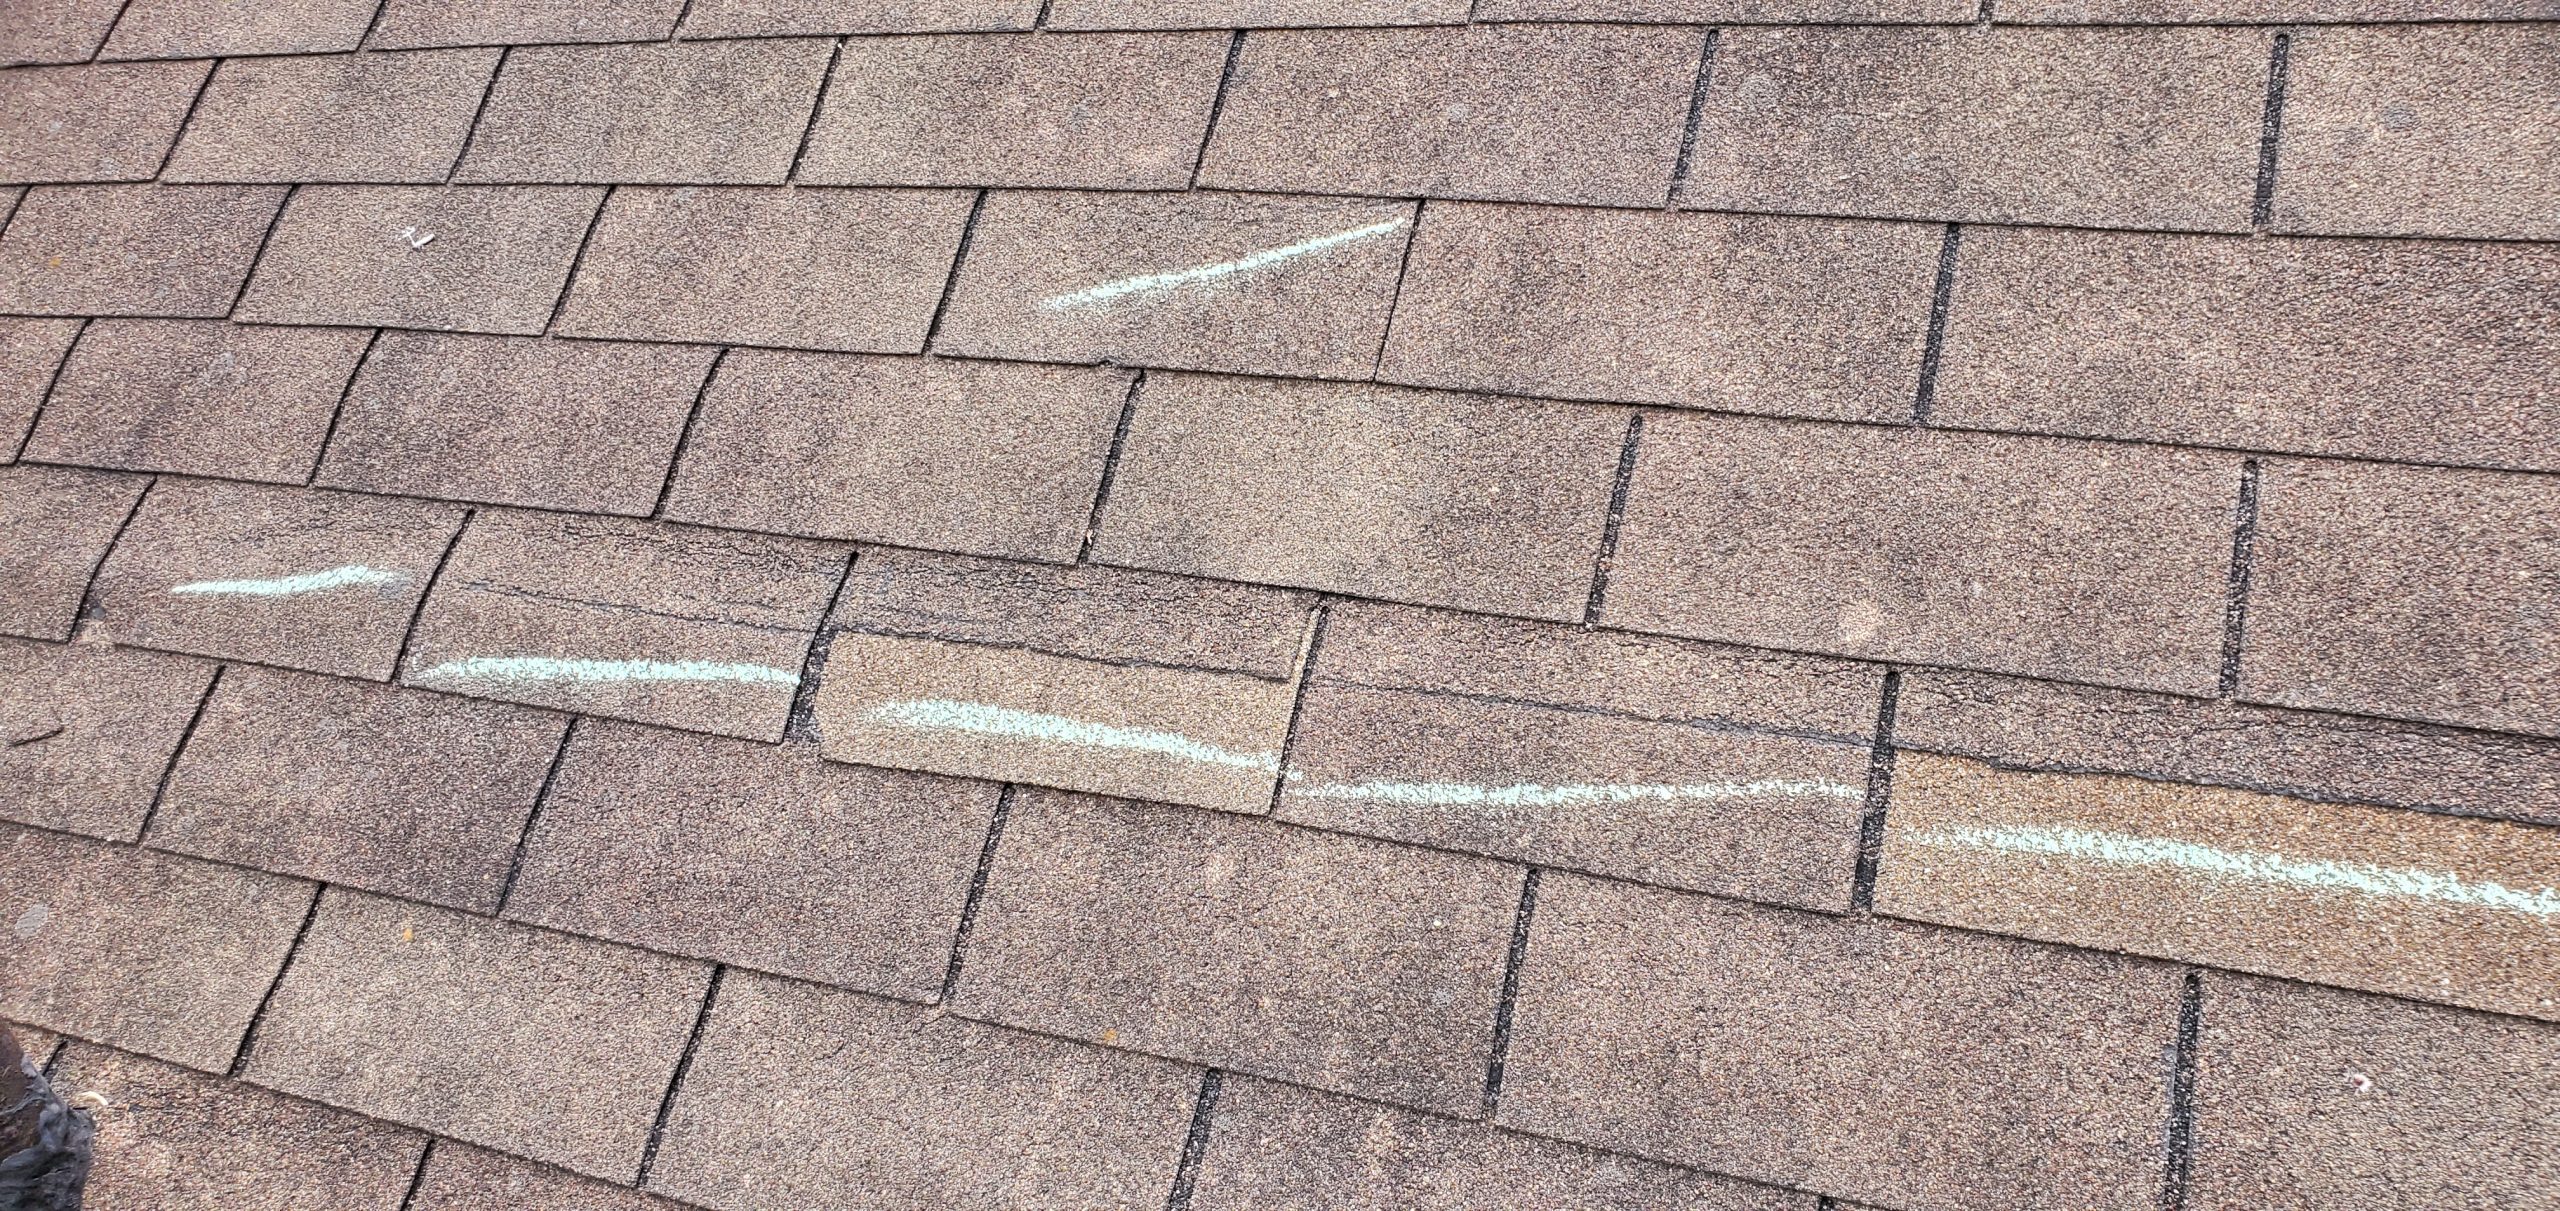 this picture shows some sort of a cut along several roofing shingles